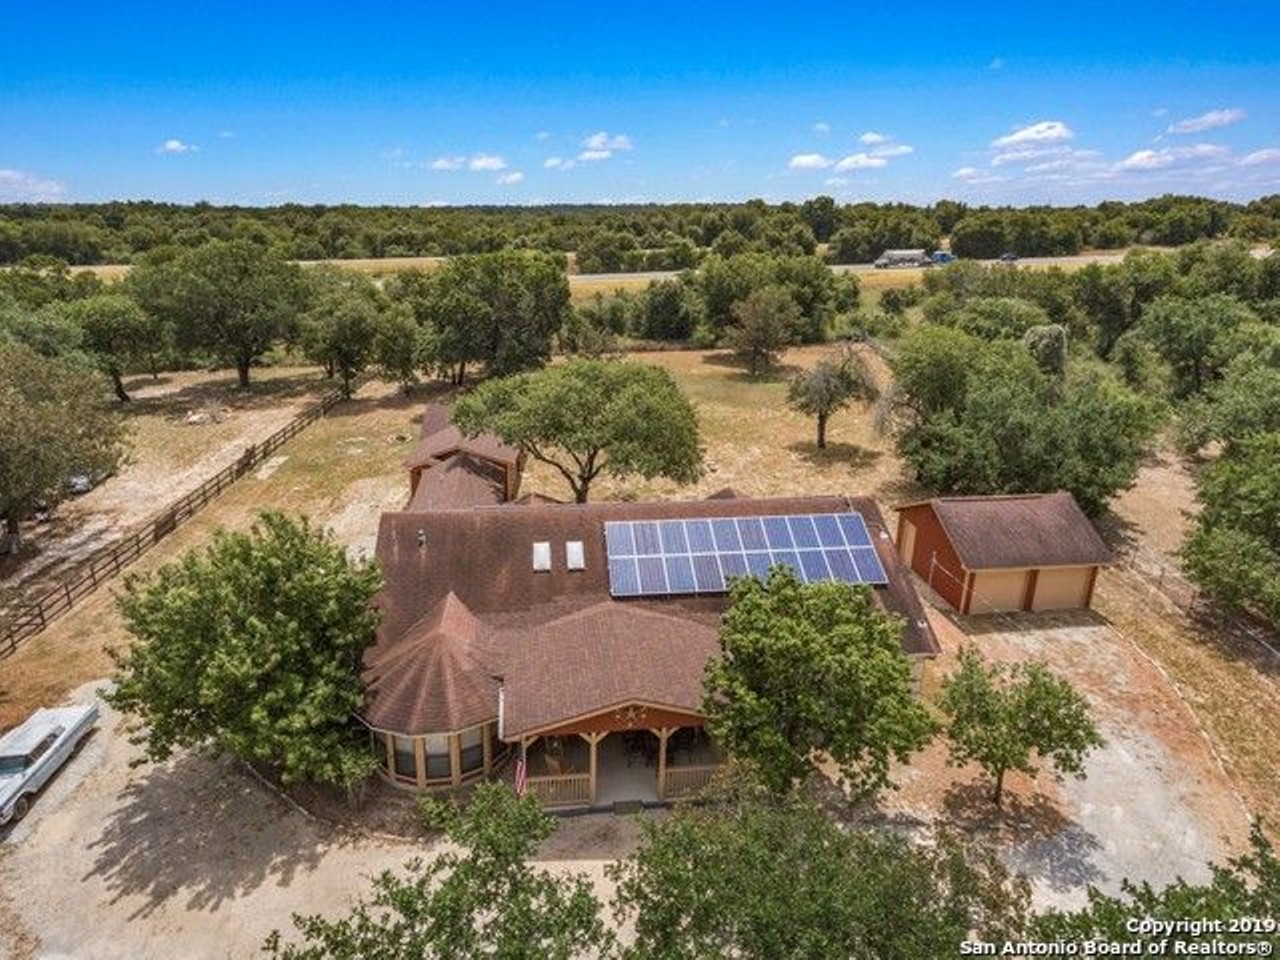 This Southside San Antonio Home for Sale Is a Solar-Powered Nature Lover's Hideaway